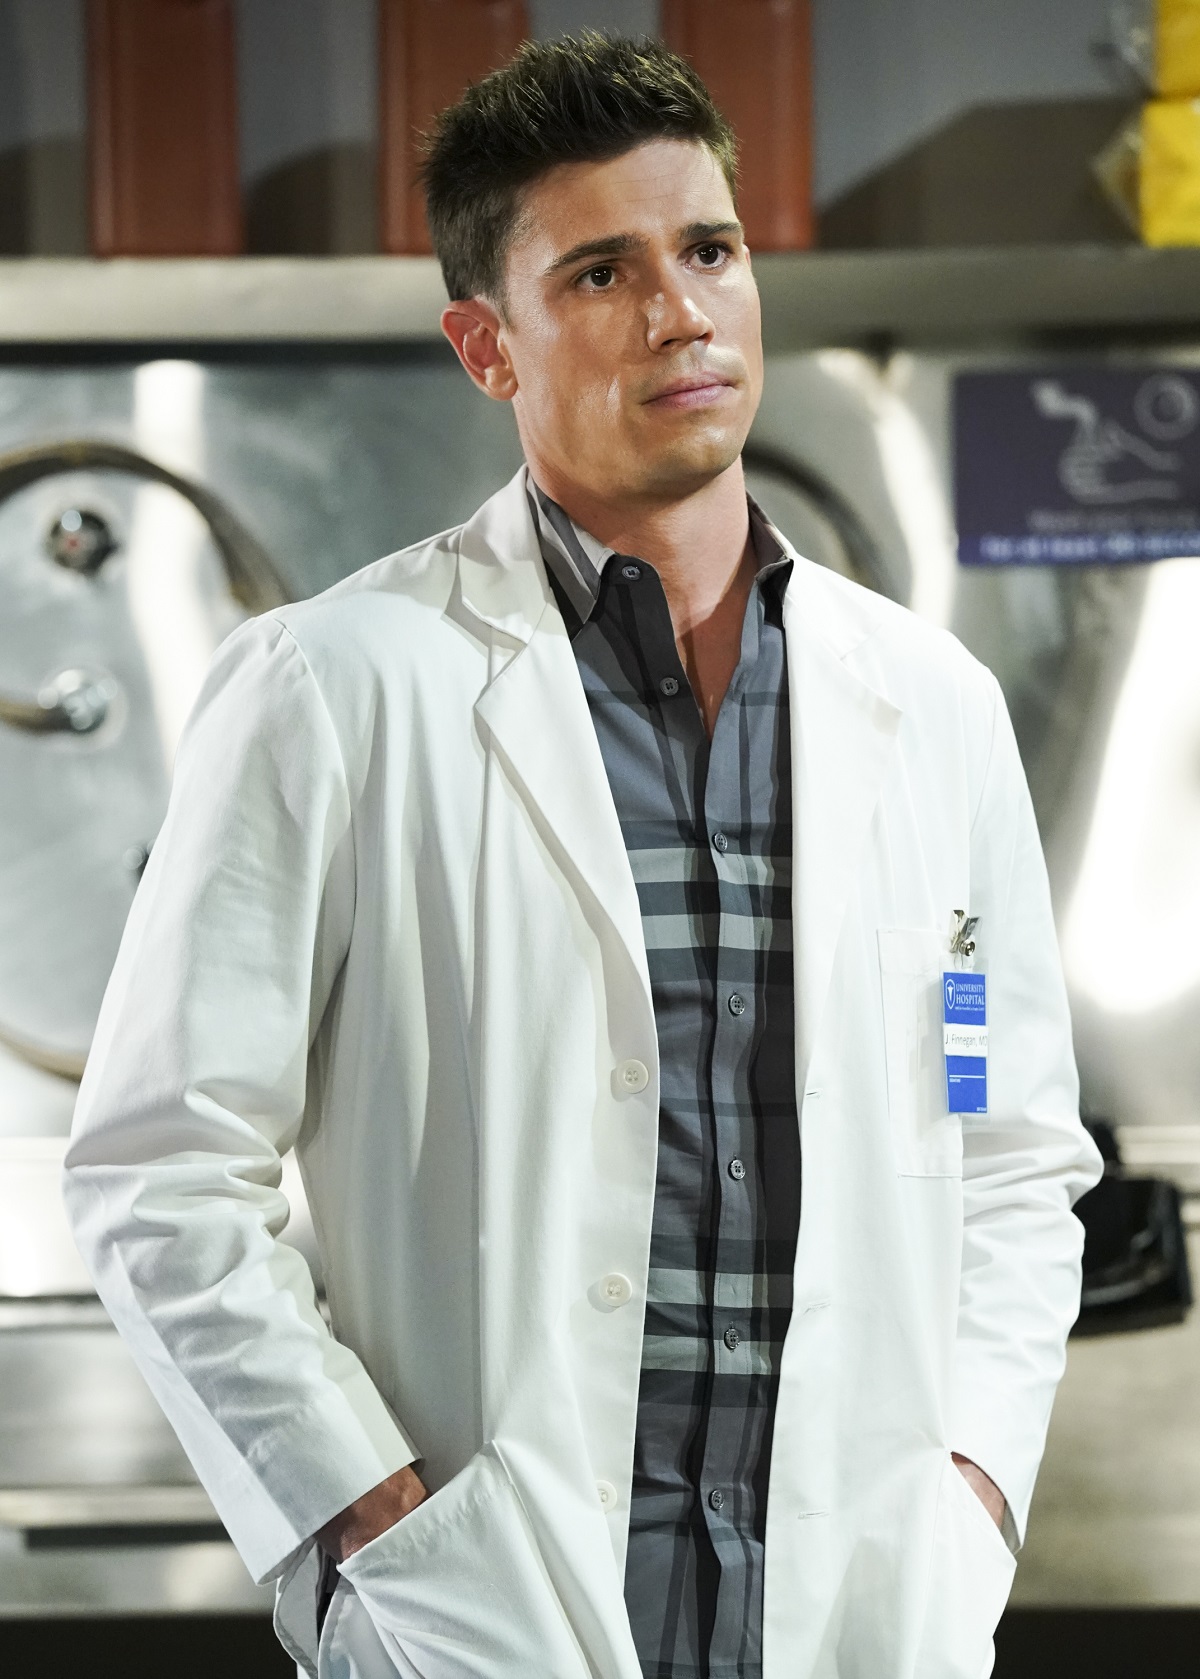 'The Bold and the Beautiful' actor Tanner Novlan wearing a plaid shirt and white lab coat.